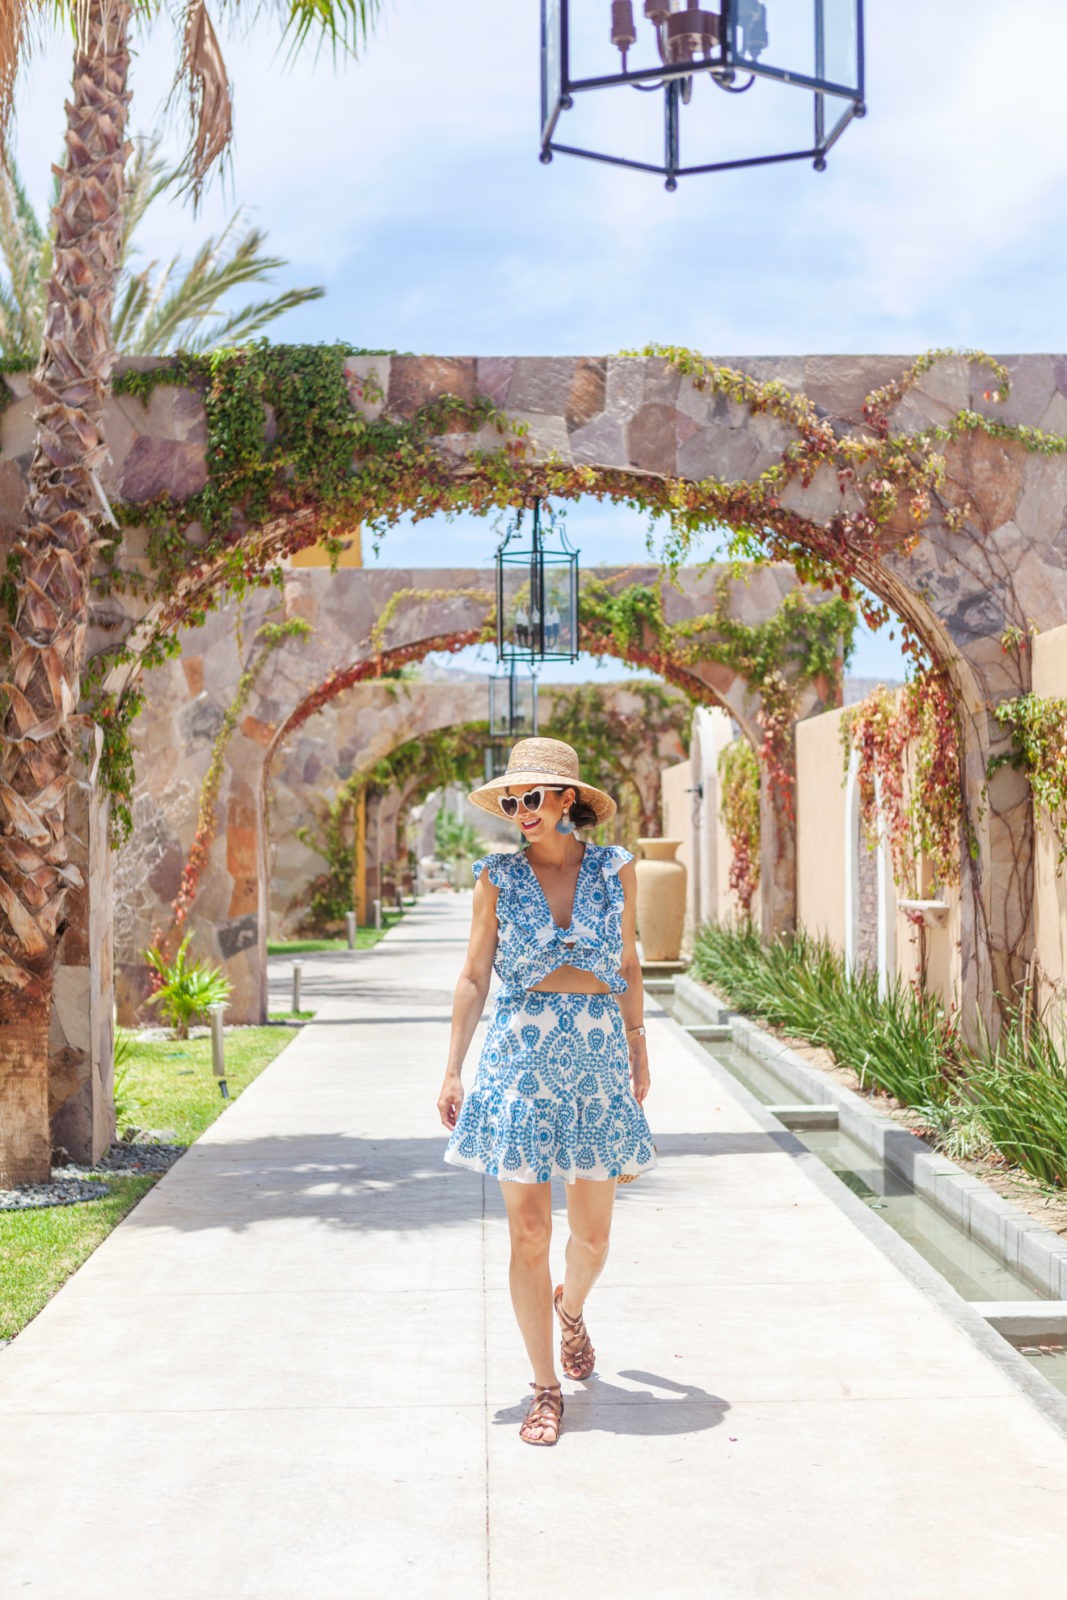 Hacienda Encantada Resort featured by top US travel blogger Laura Lily; Image of a woman wearing a blue and white dress.